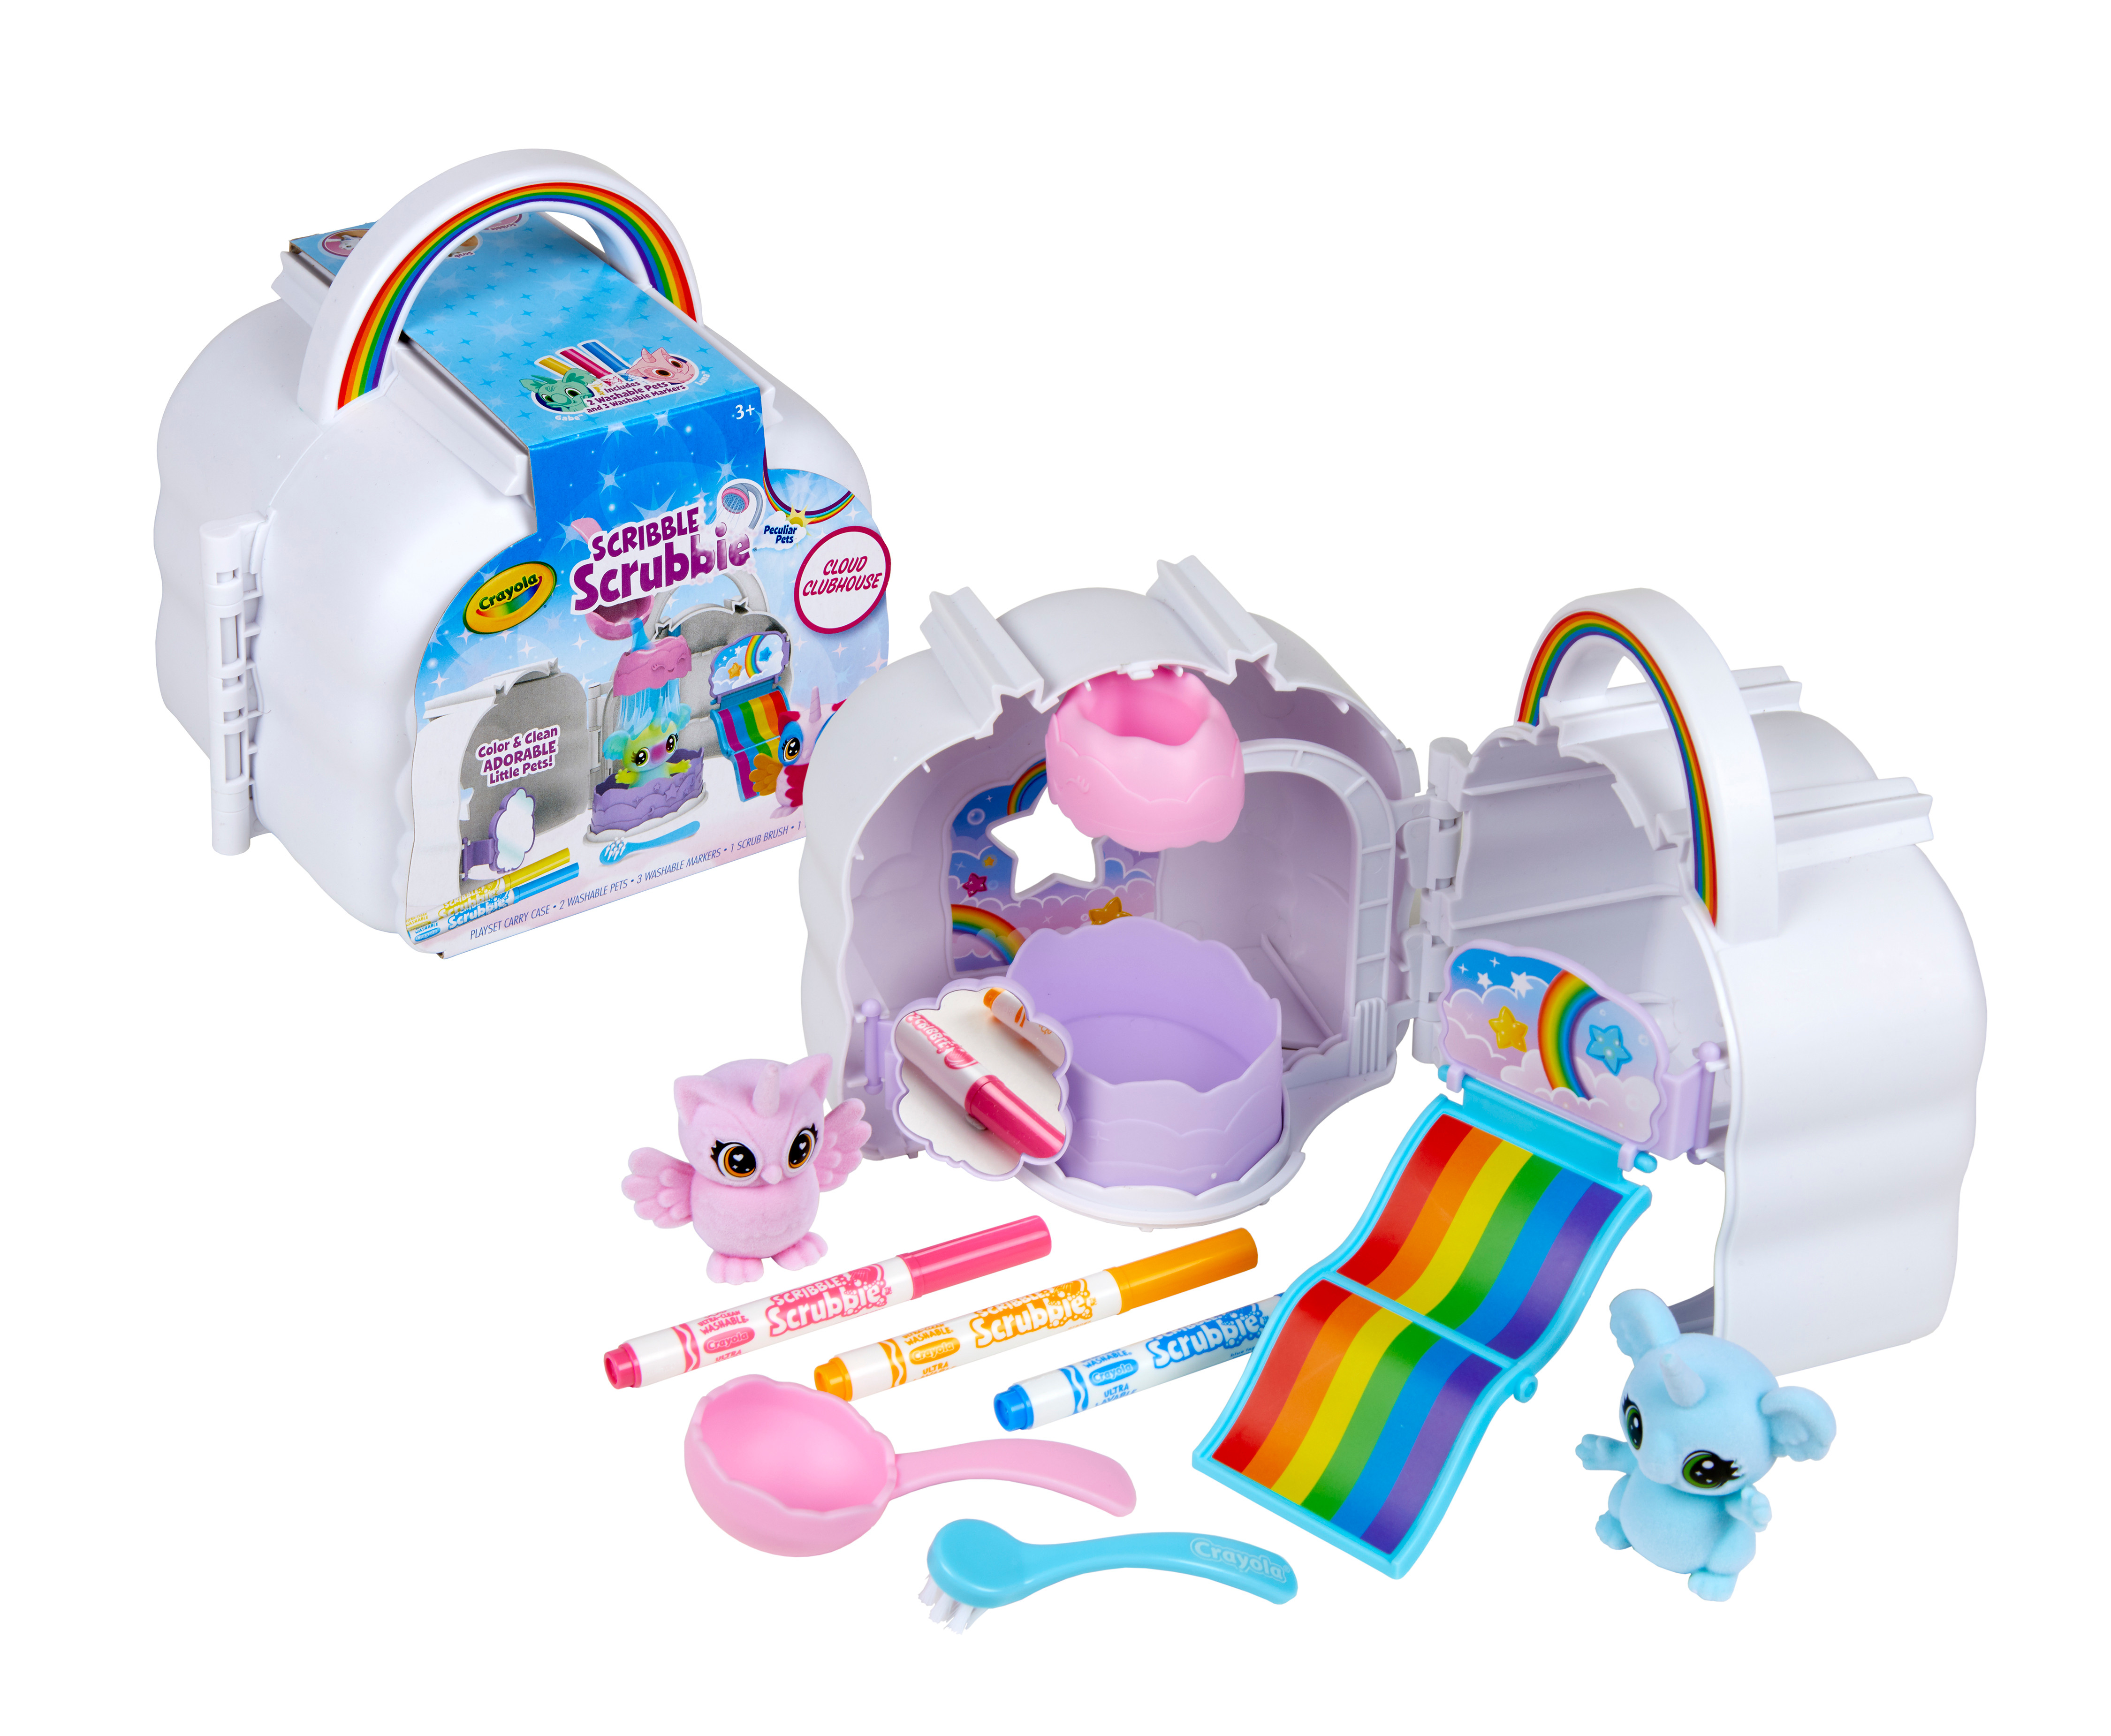 Crayola Scribble Scrubbie Cloud Clubhouse, Coloring Toys, Gifts, Beginner Unisex Child, 8 Pcs - image 9 of 10